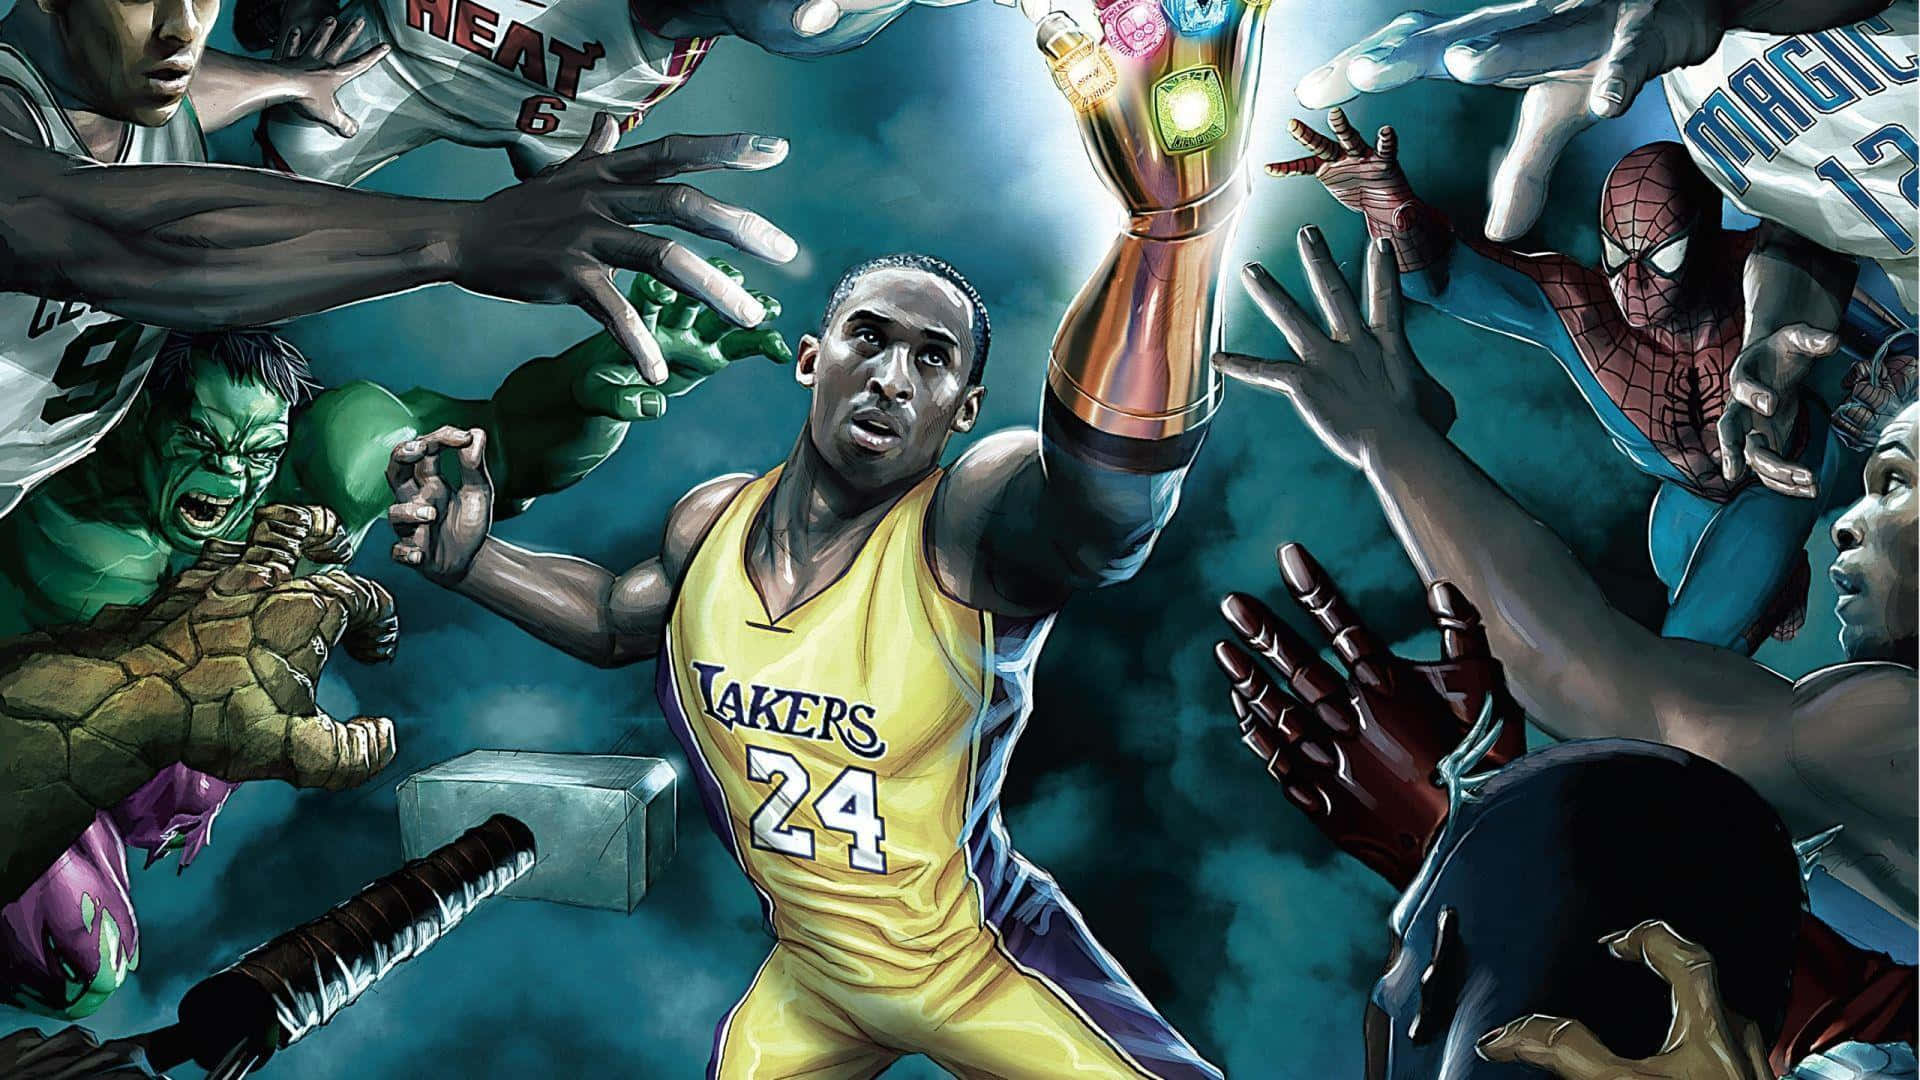 a comic book illustration of a group of basketball players Wallpaper